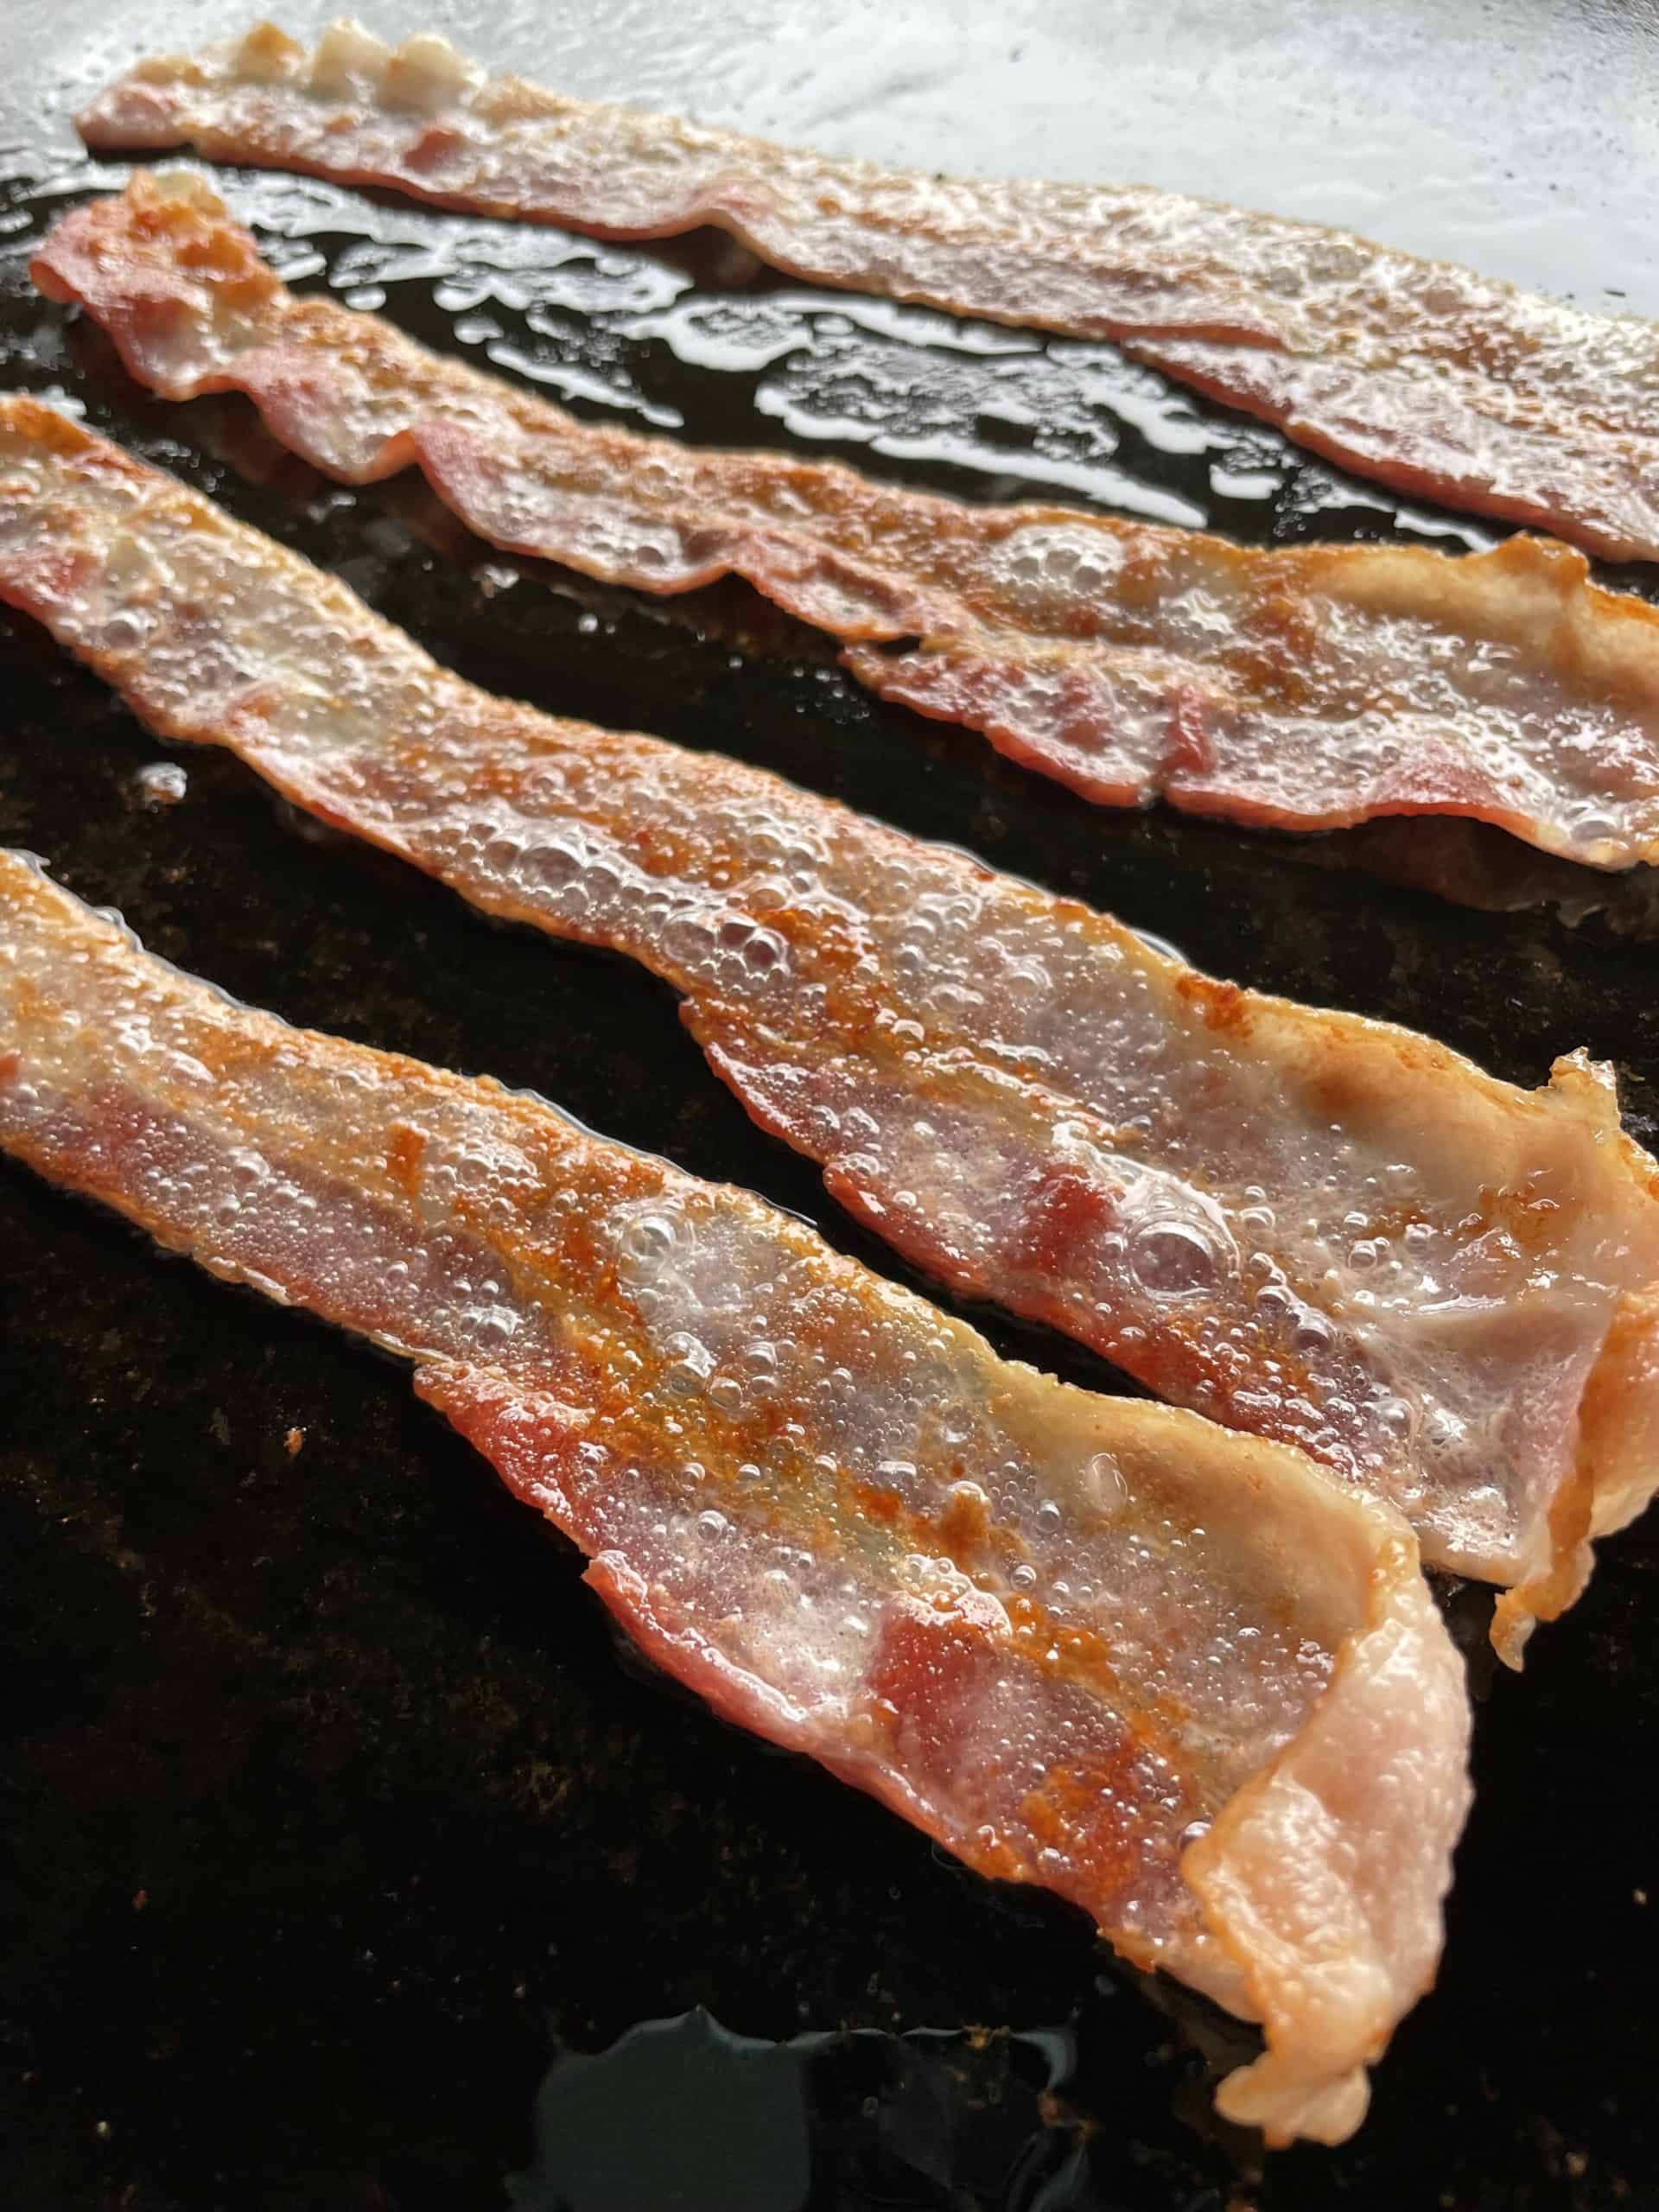 Cooking bacon slices on a Blackstone Griddle.